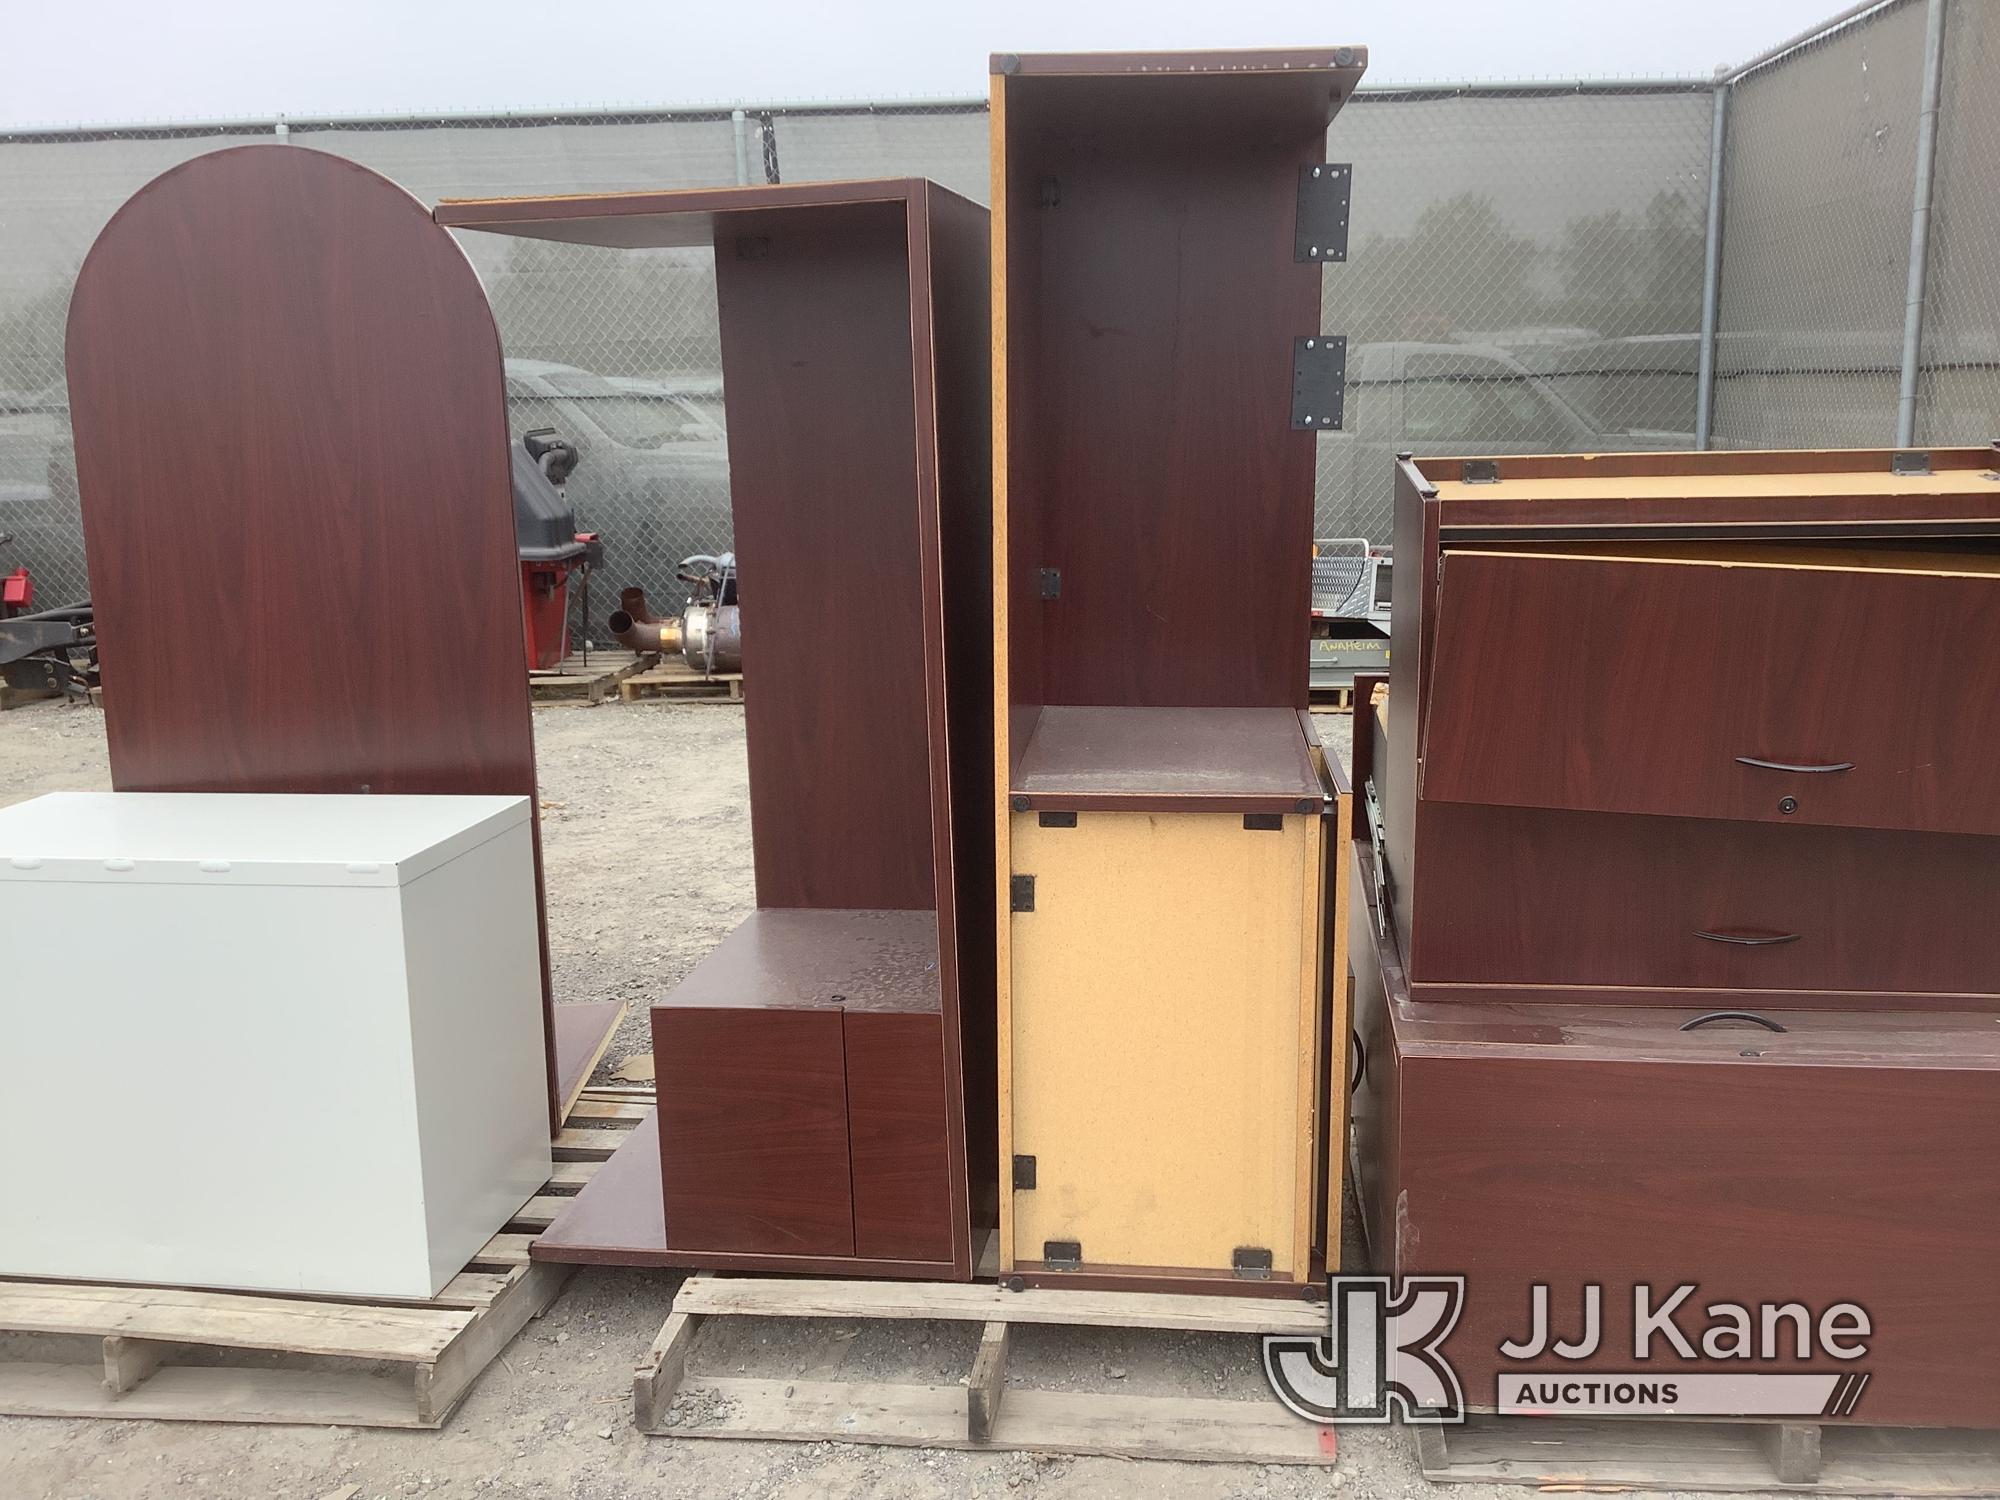 (Jurupa Valley, CA) 6 Pallets Of Office Furniture (Used) NOTE: This unit is being sold AS IS/WHERE I